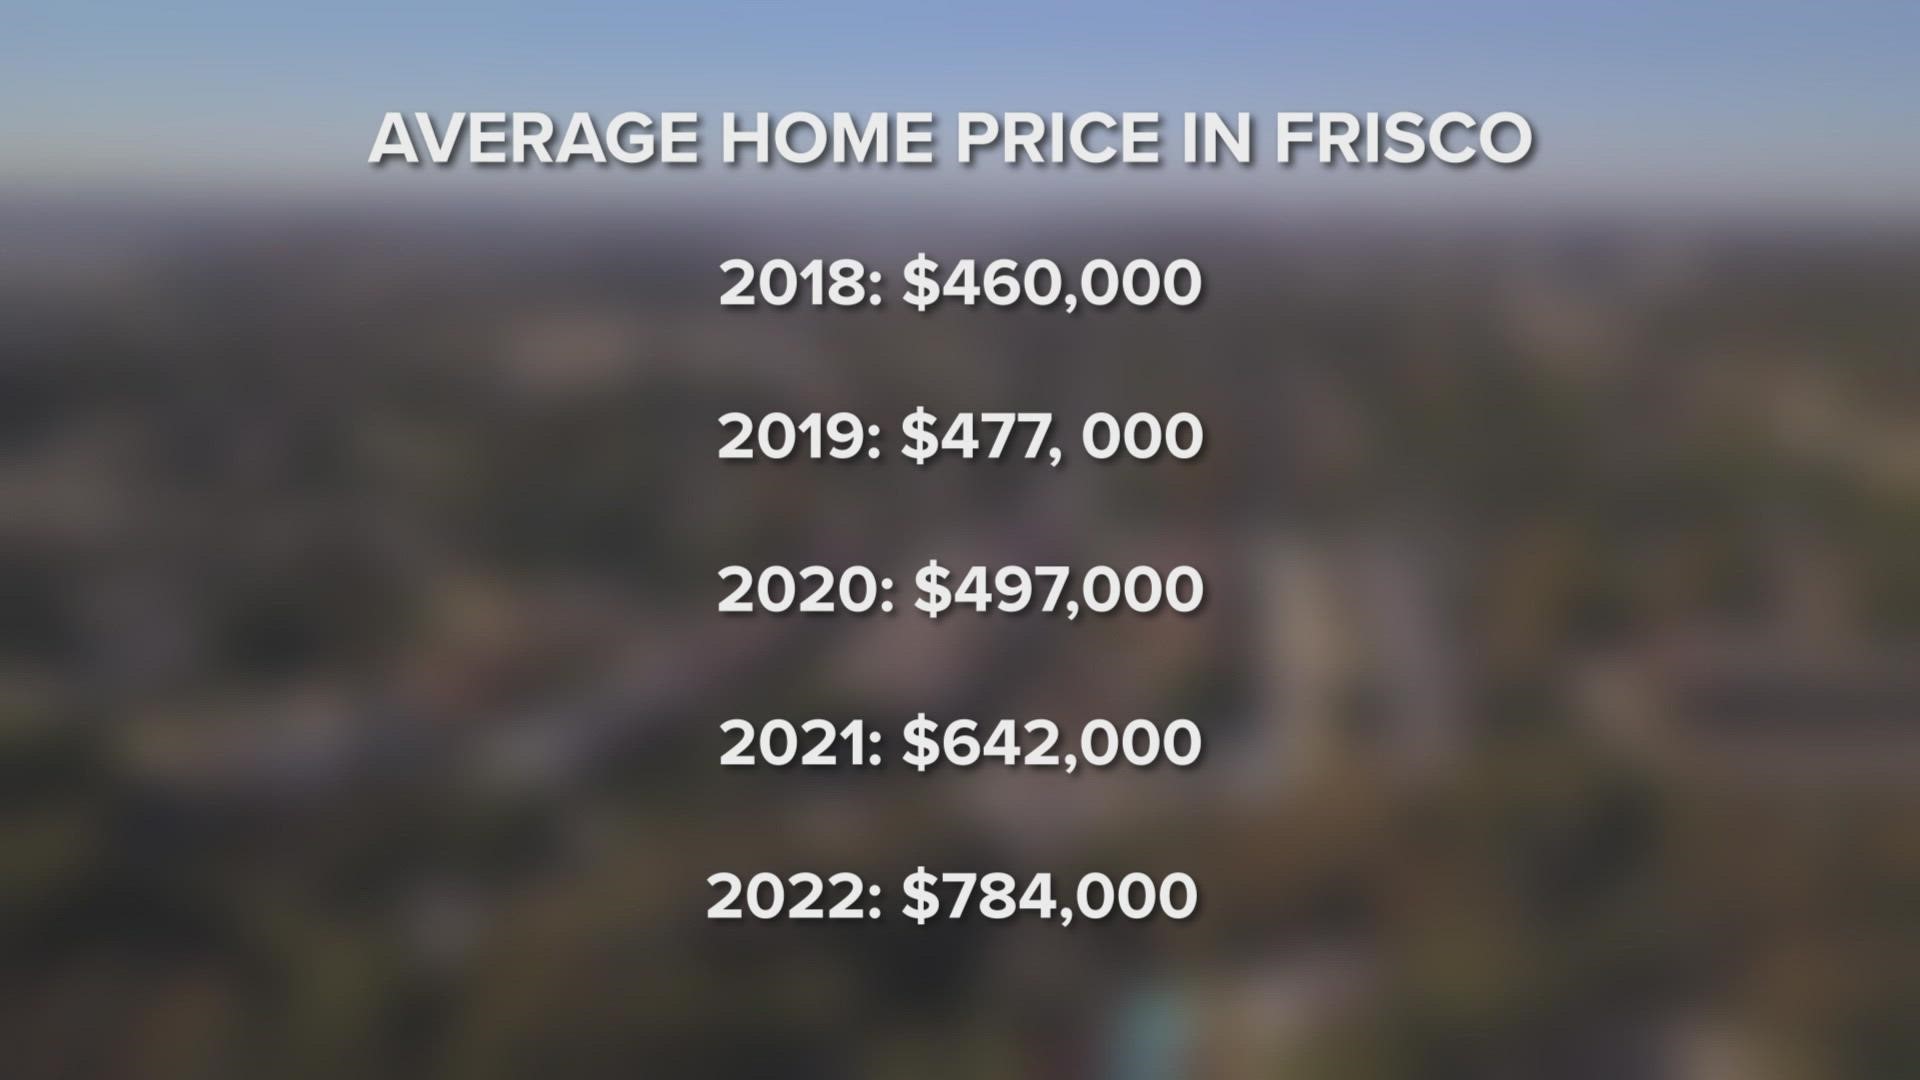 For people hoping to purchase homes in Frisco, one realtor said her advice is to get in now.